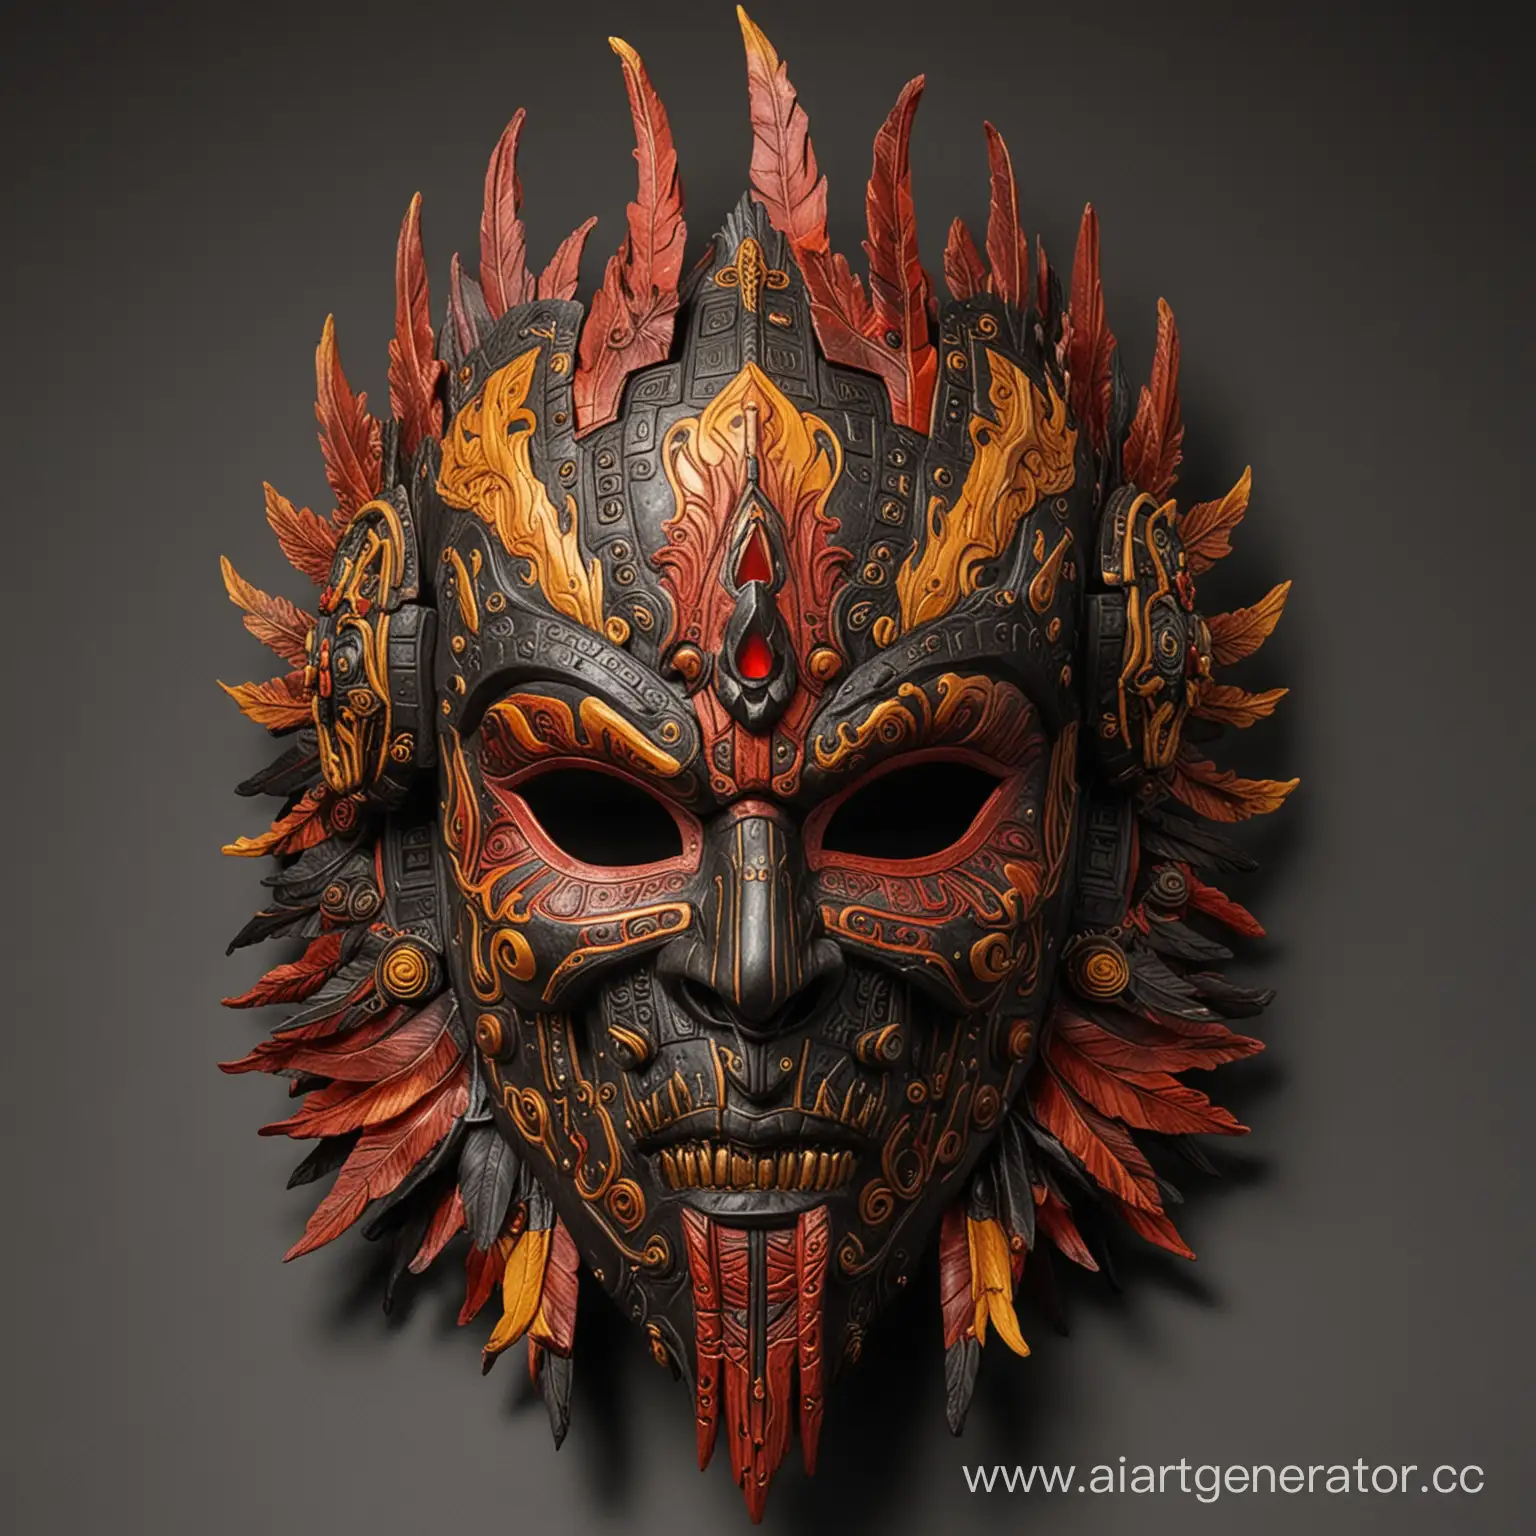 Intricately-Crafted-Fire-Warrior-Mask-Symbolic-Power-and-Passion